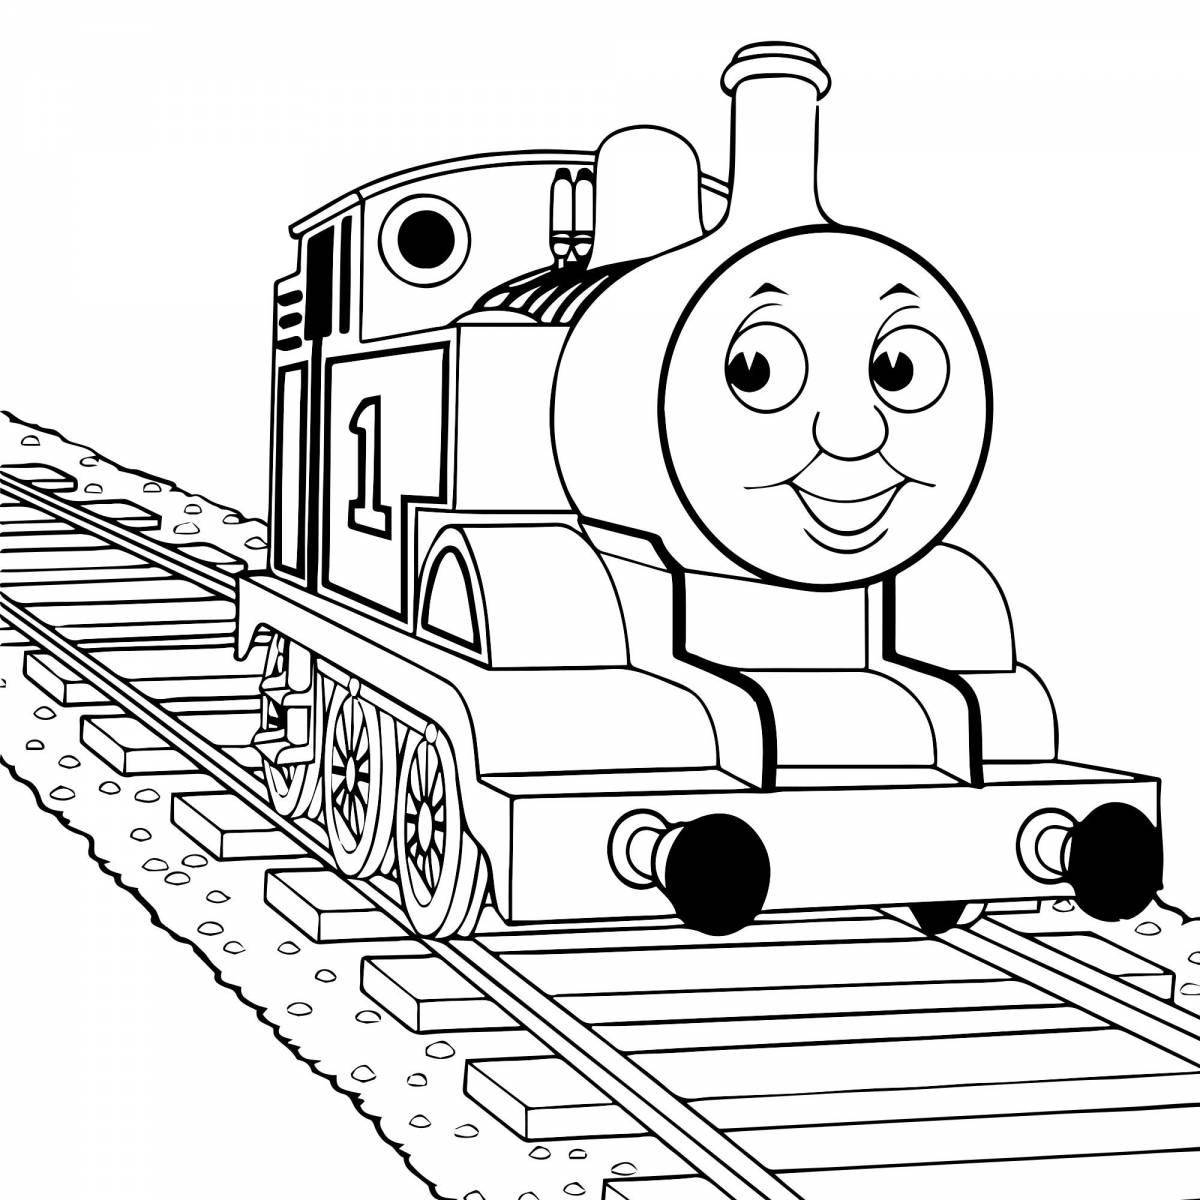 Coloring book magic train for children 5-6 years old